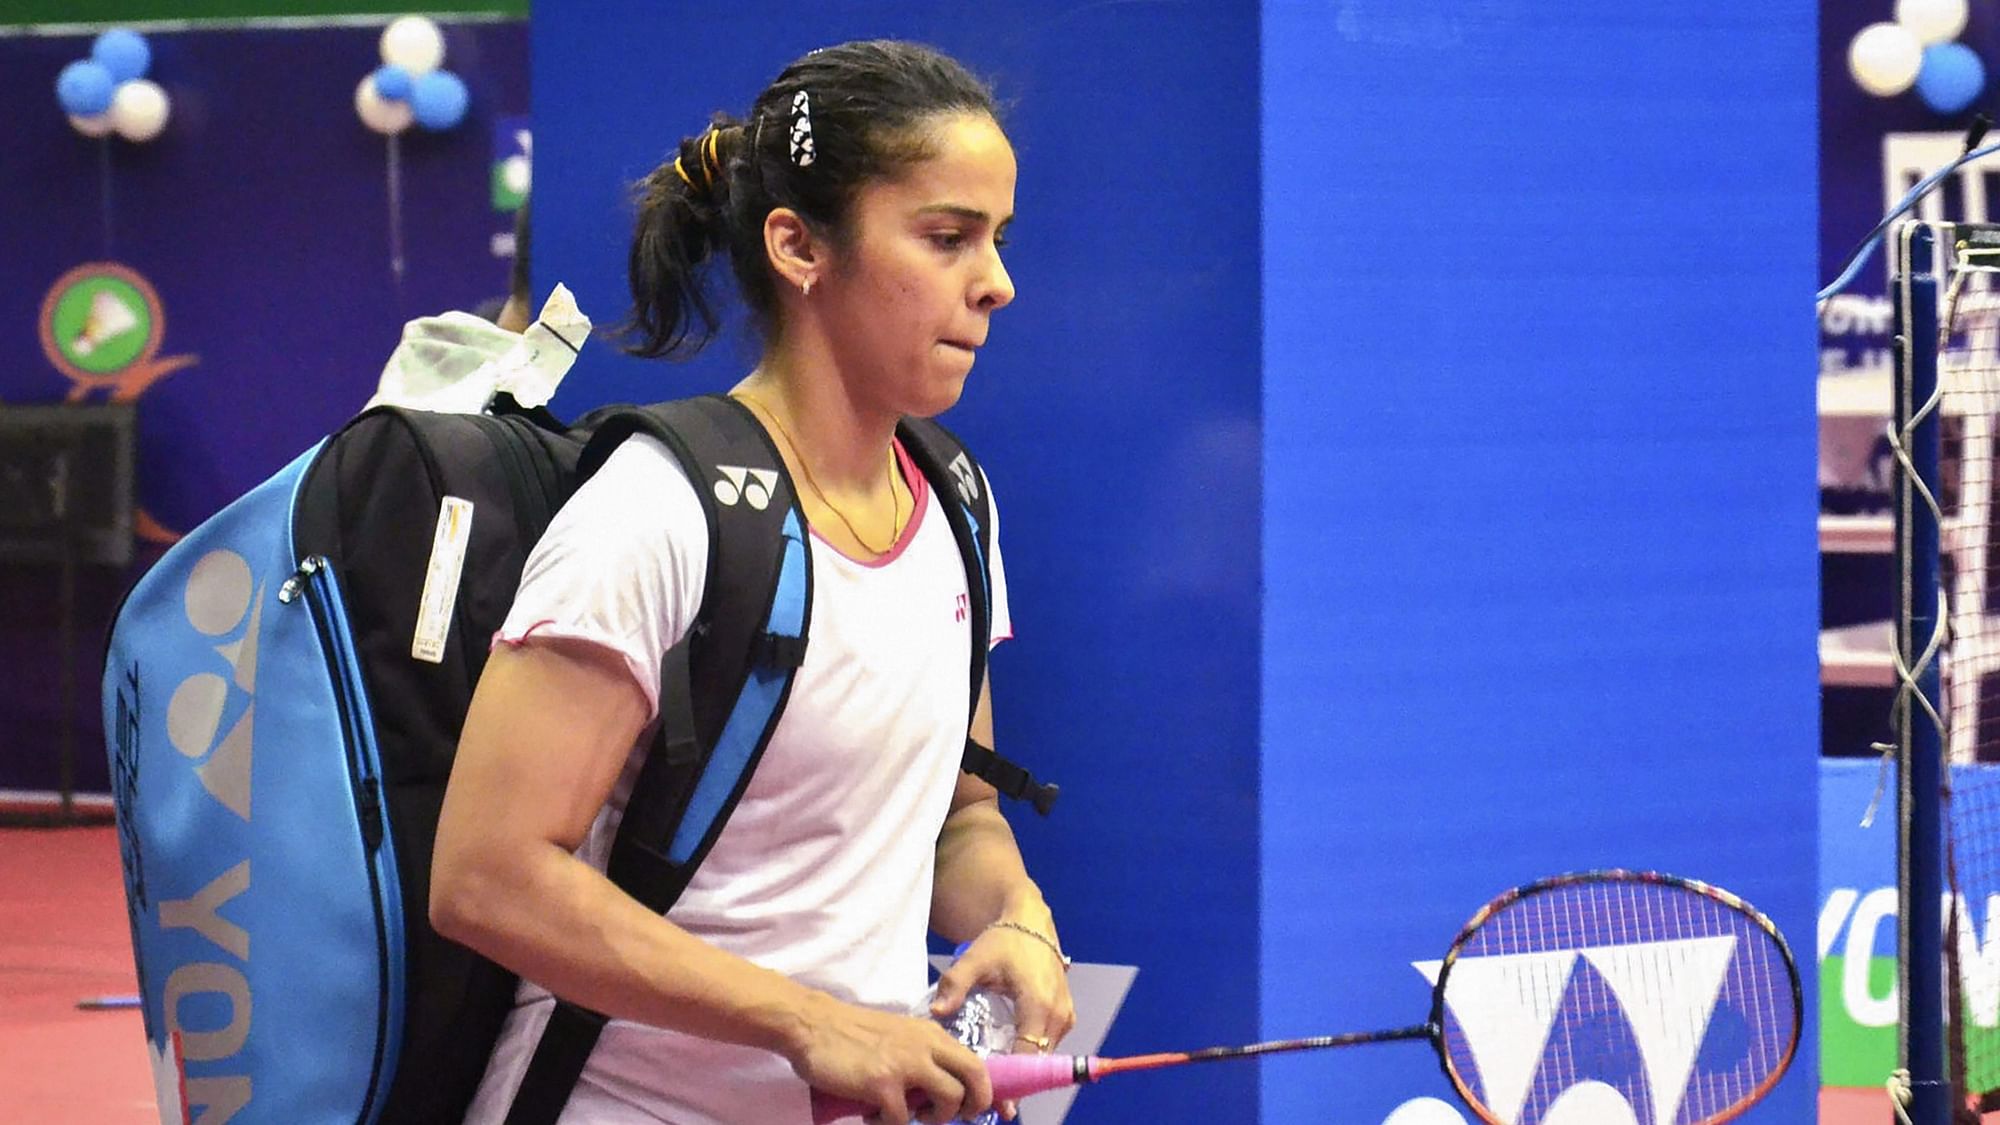  Saina Nehwal suffered a second consecutive opening round defeat as she went to Line Hojmark Kjaersfeldt of Denmark to bring curtains on the country’s campaign in the Thailand Masters badminton tournament on Wednesday, 22 January.